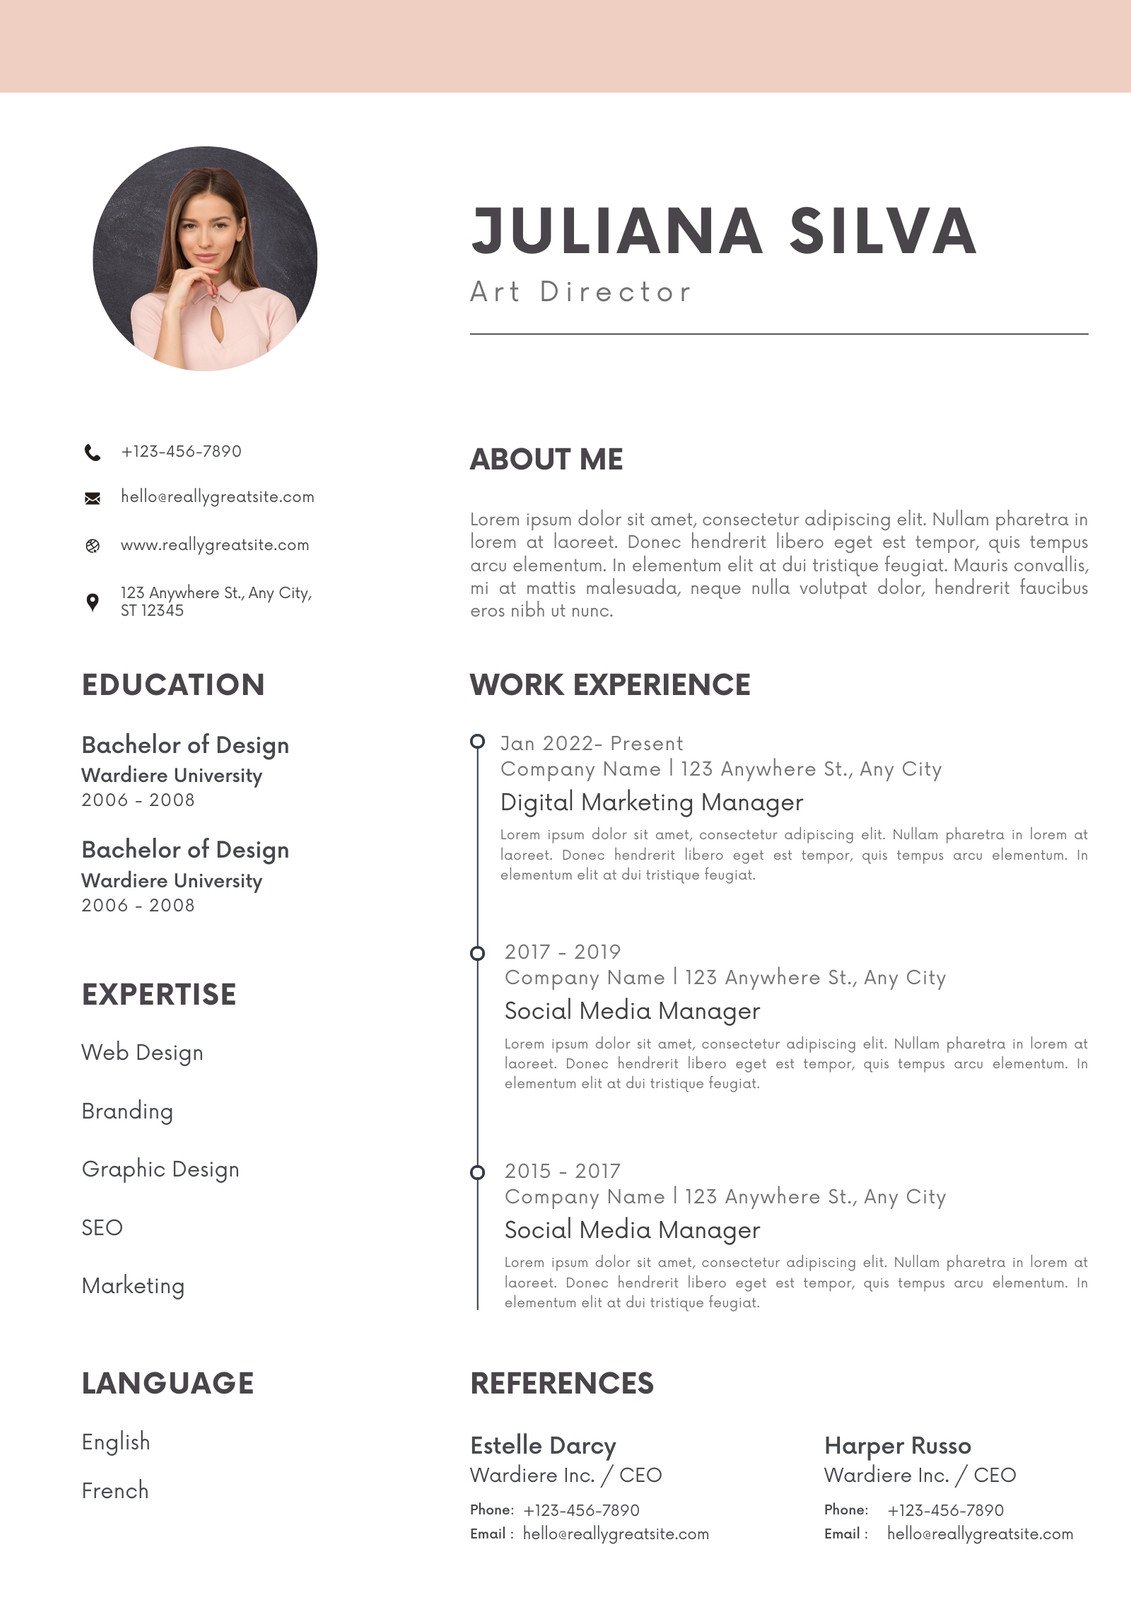 Free Printable Resume Templates You Can Customize | Canva